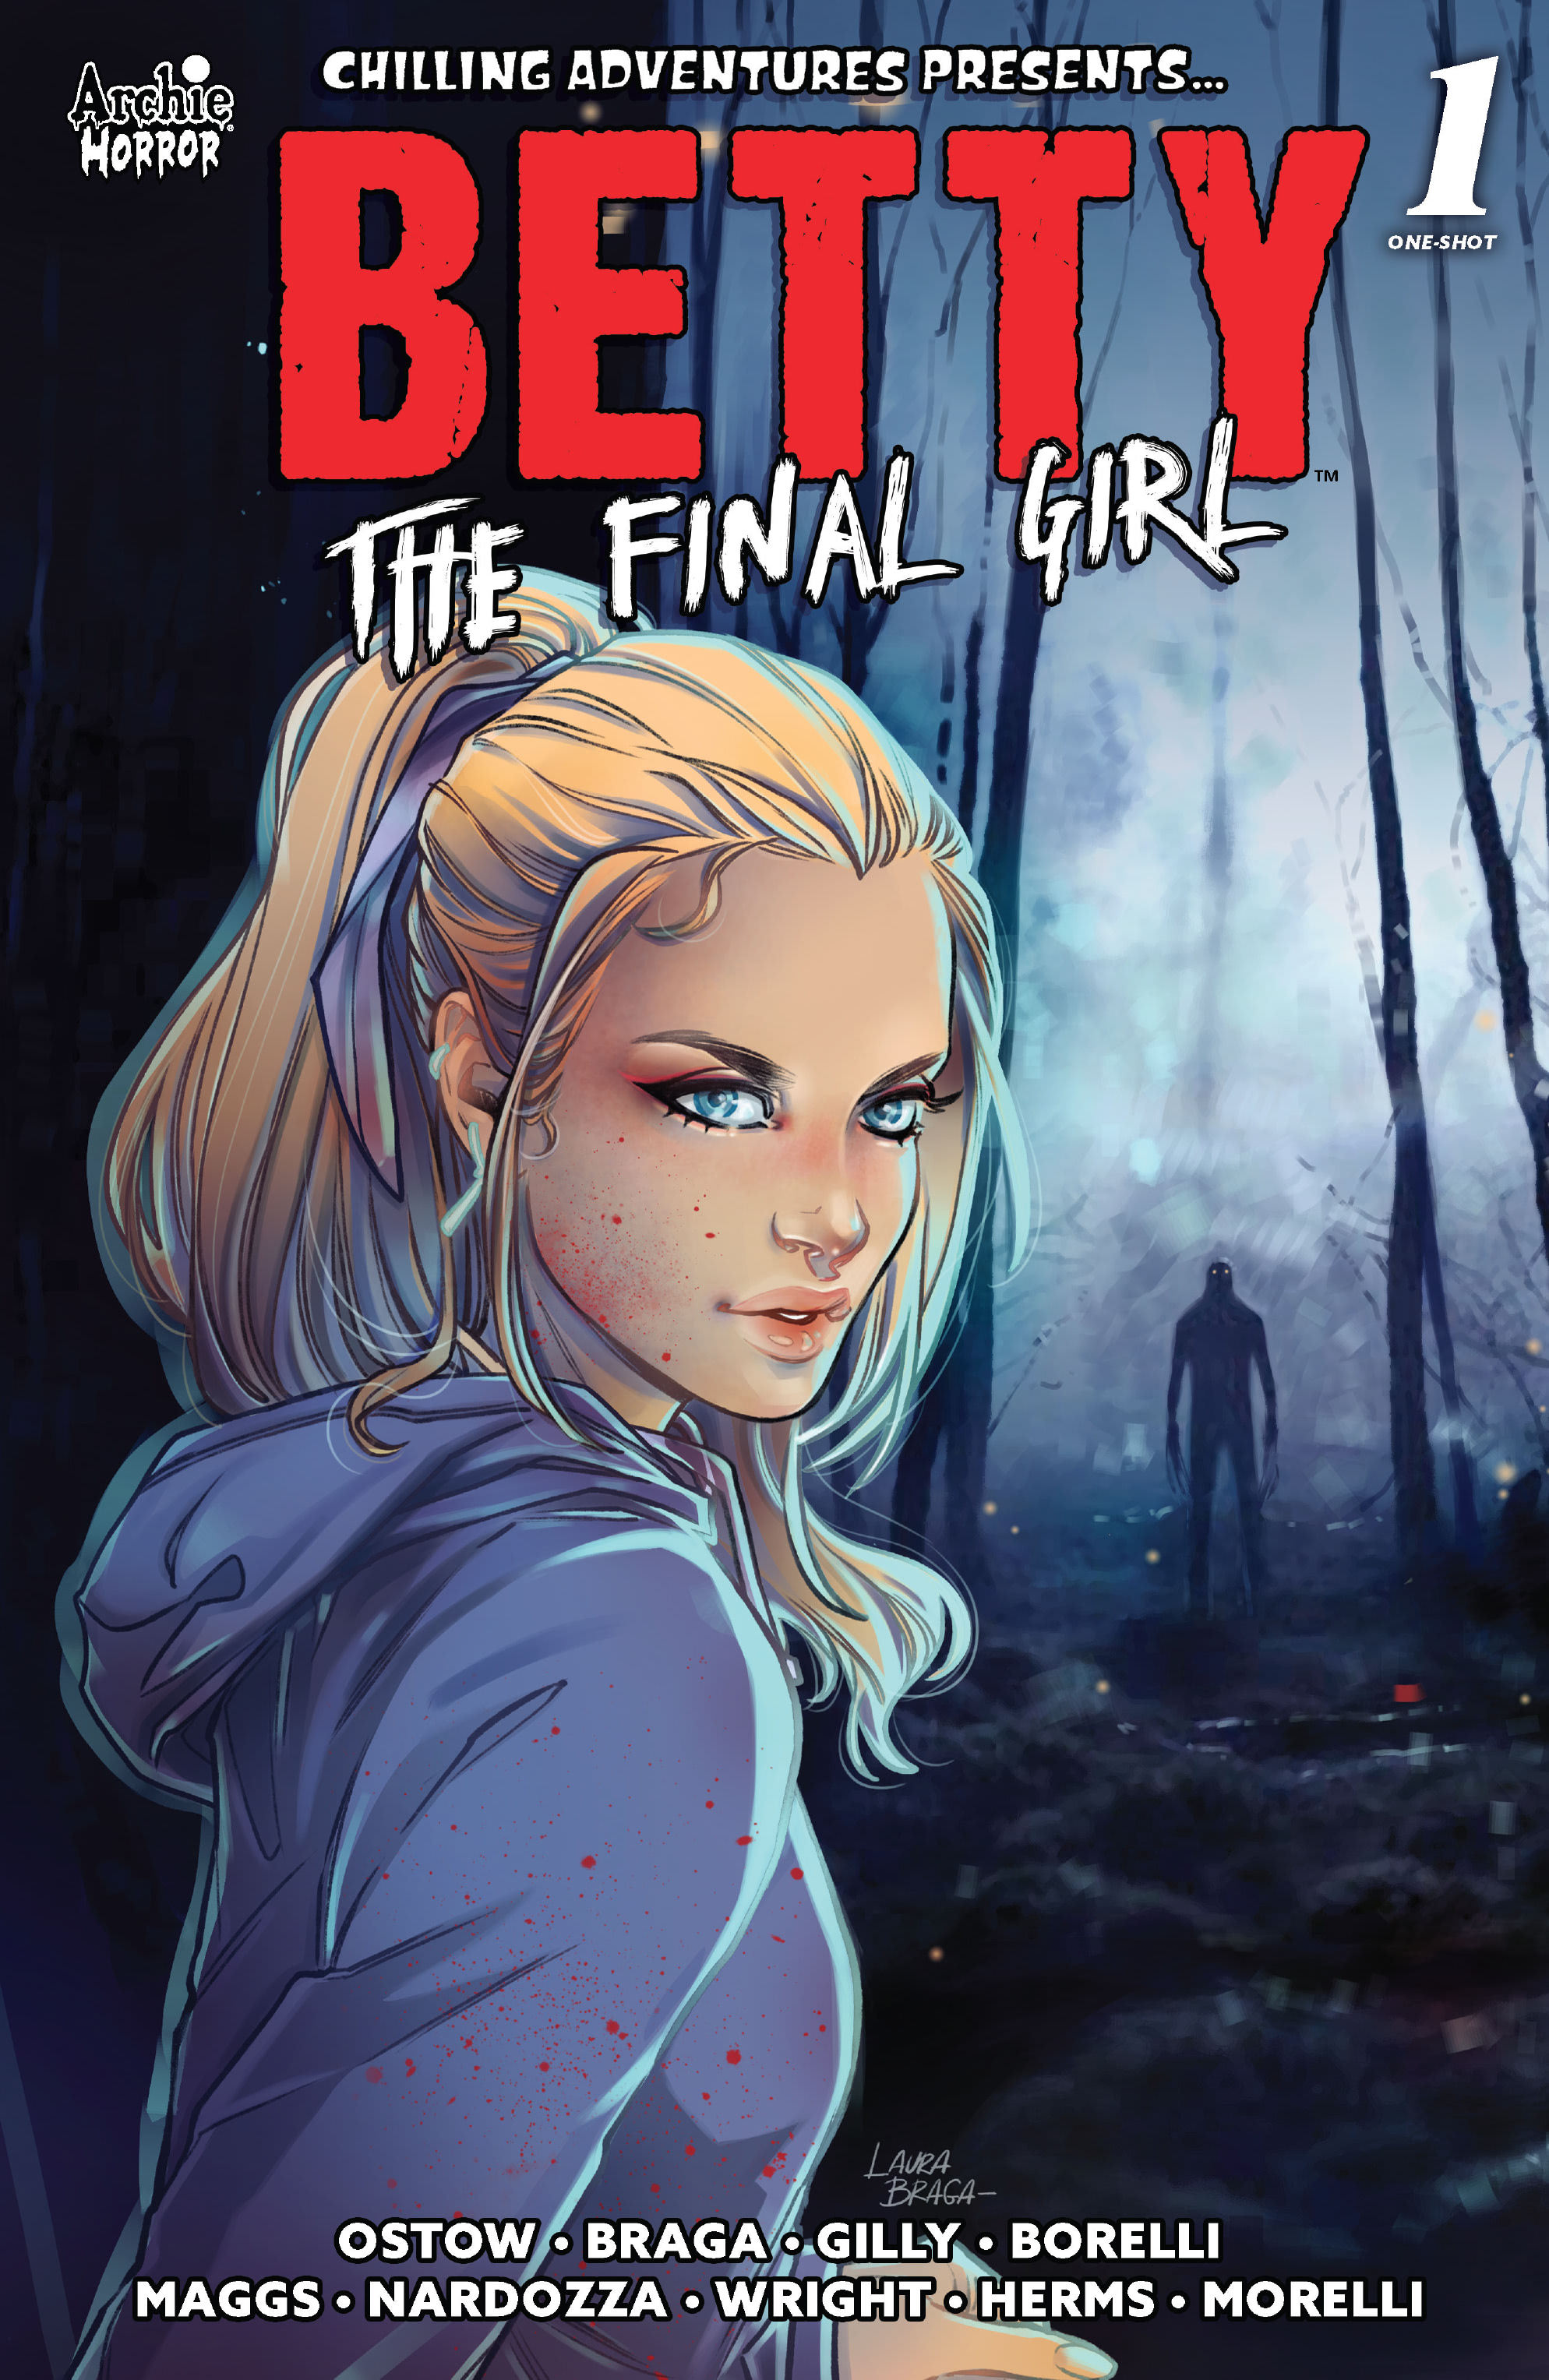 Read online Chilling Adventures Presents Betty: The Final Girl comic -  Issue # Full - 1